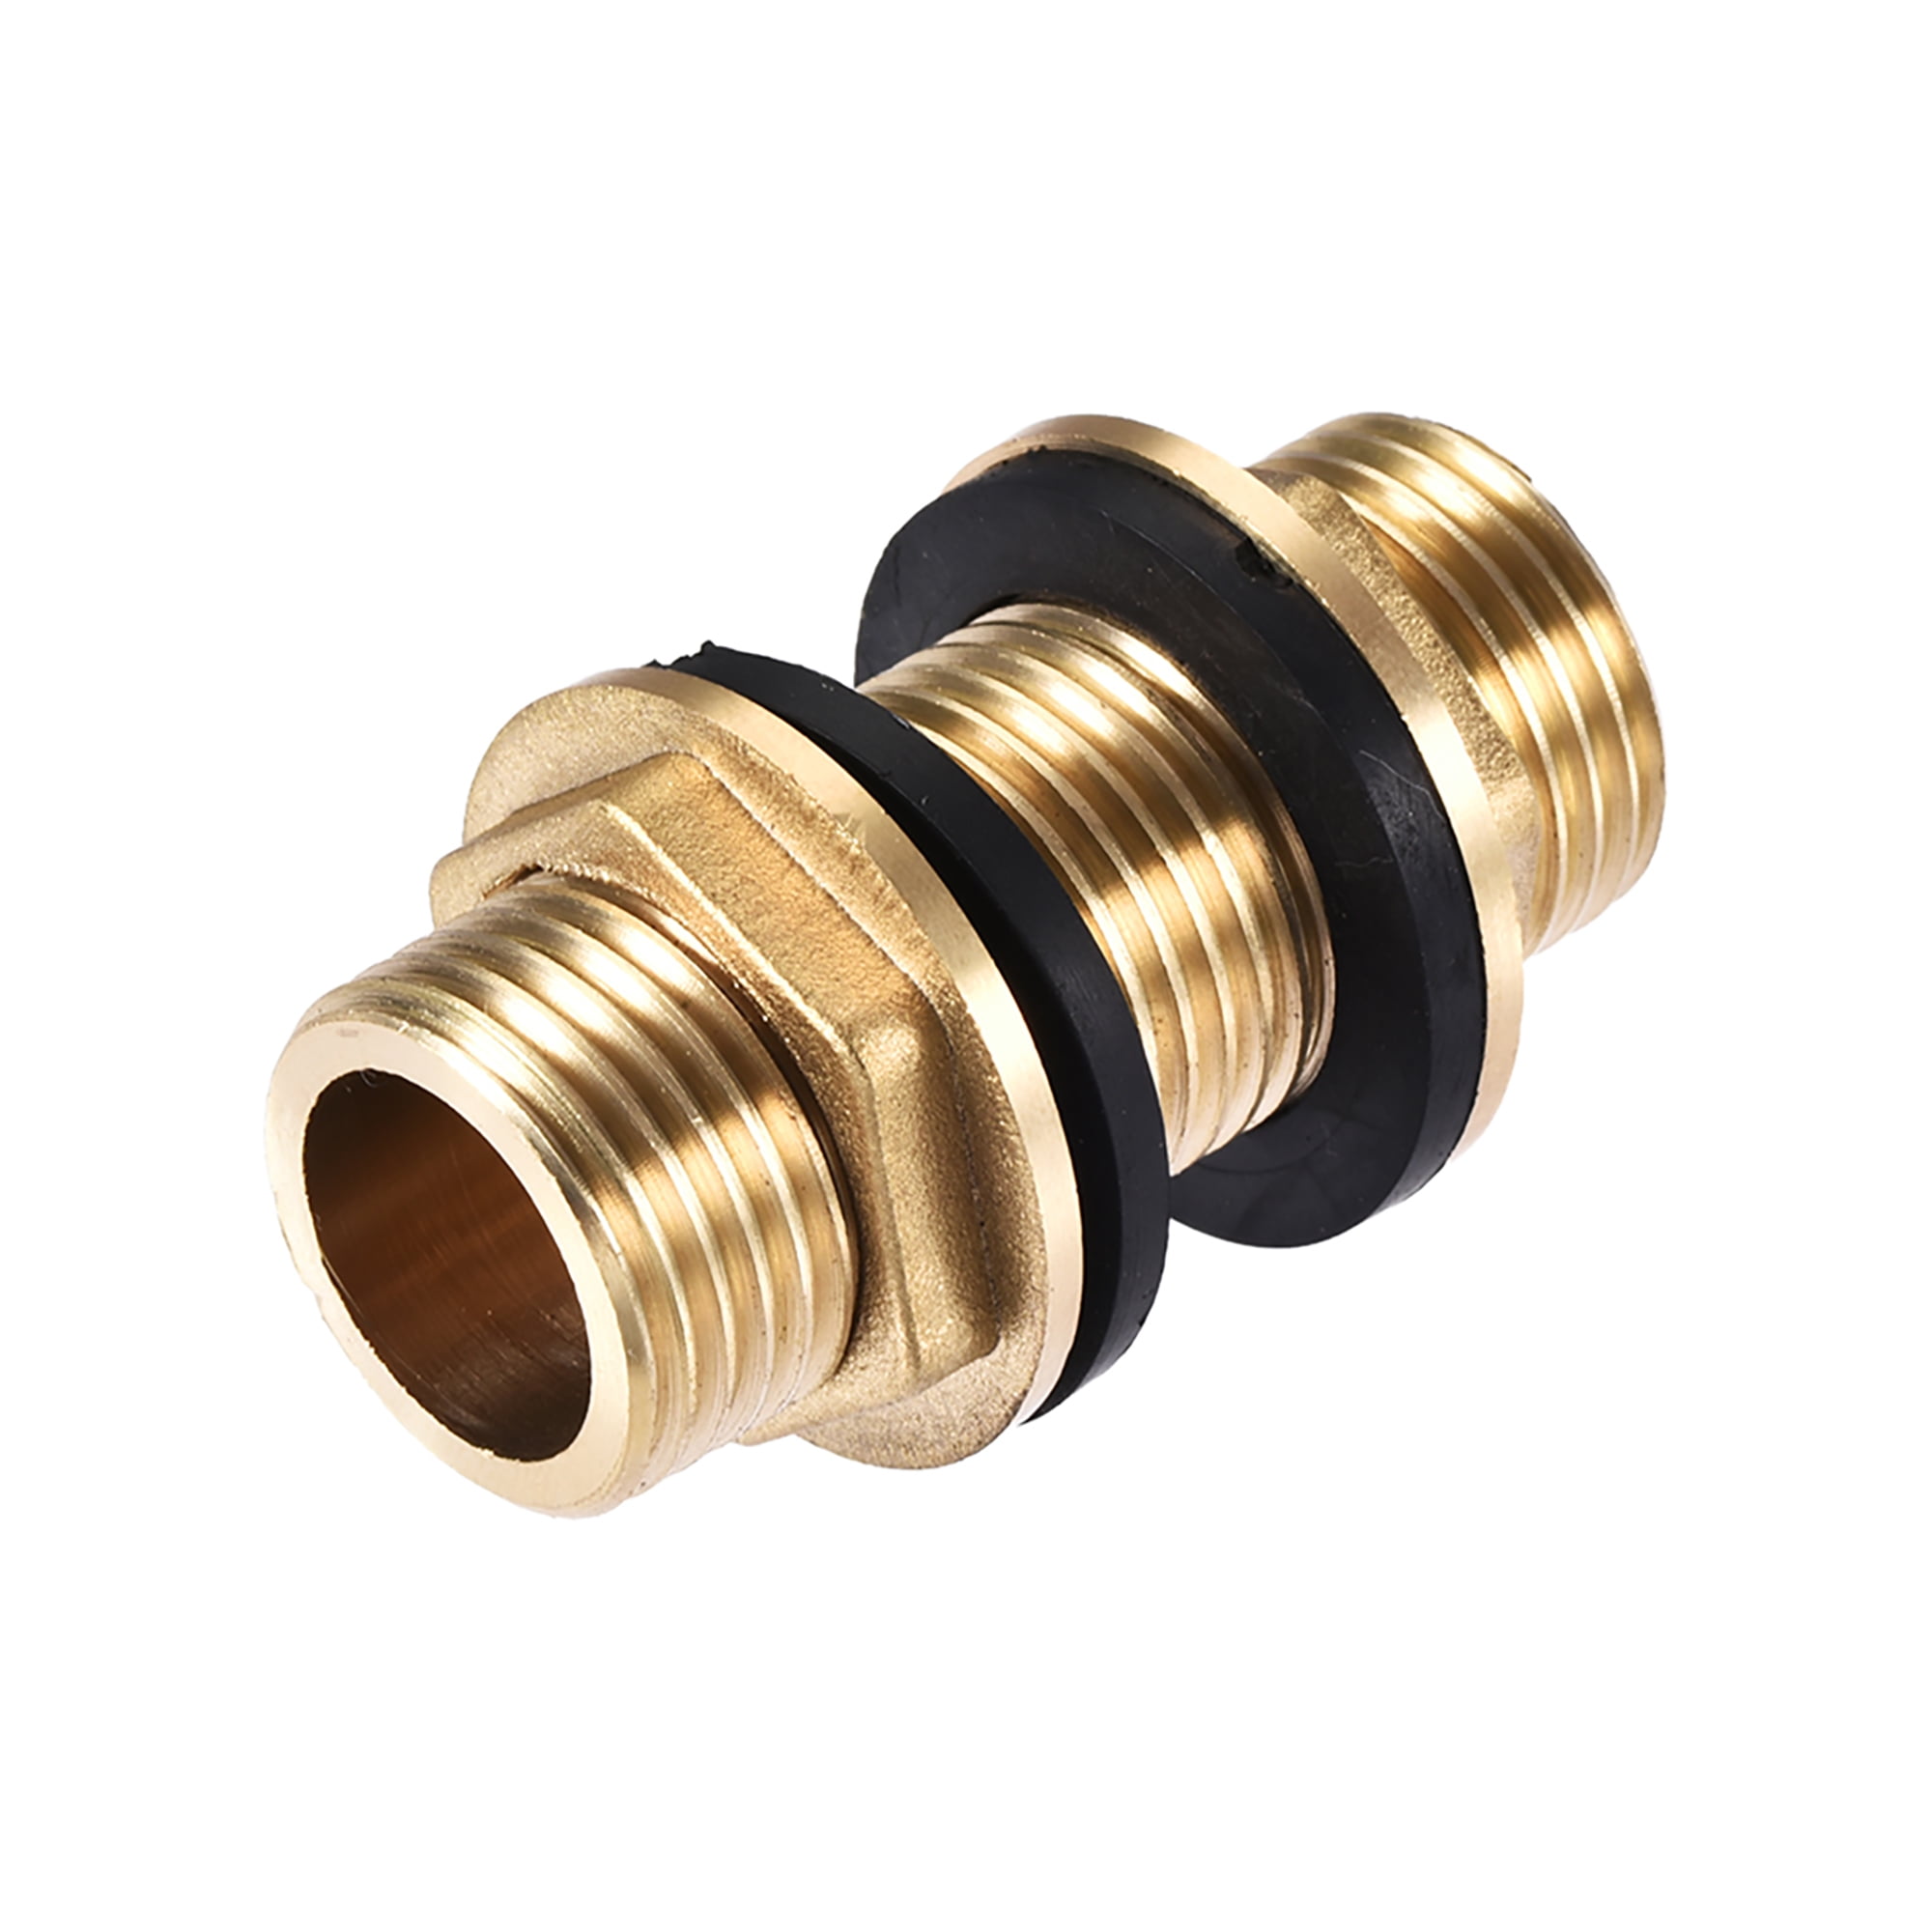 Uxcell 4mm Tube Brass Compression Fittings, 15 Pack Insert